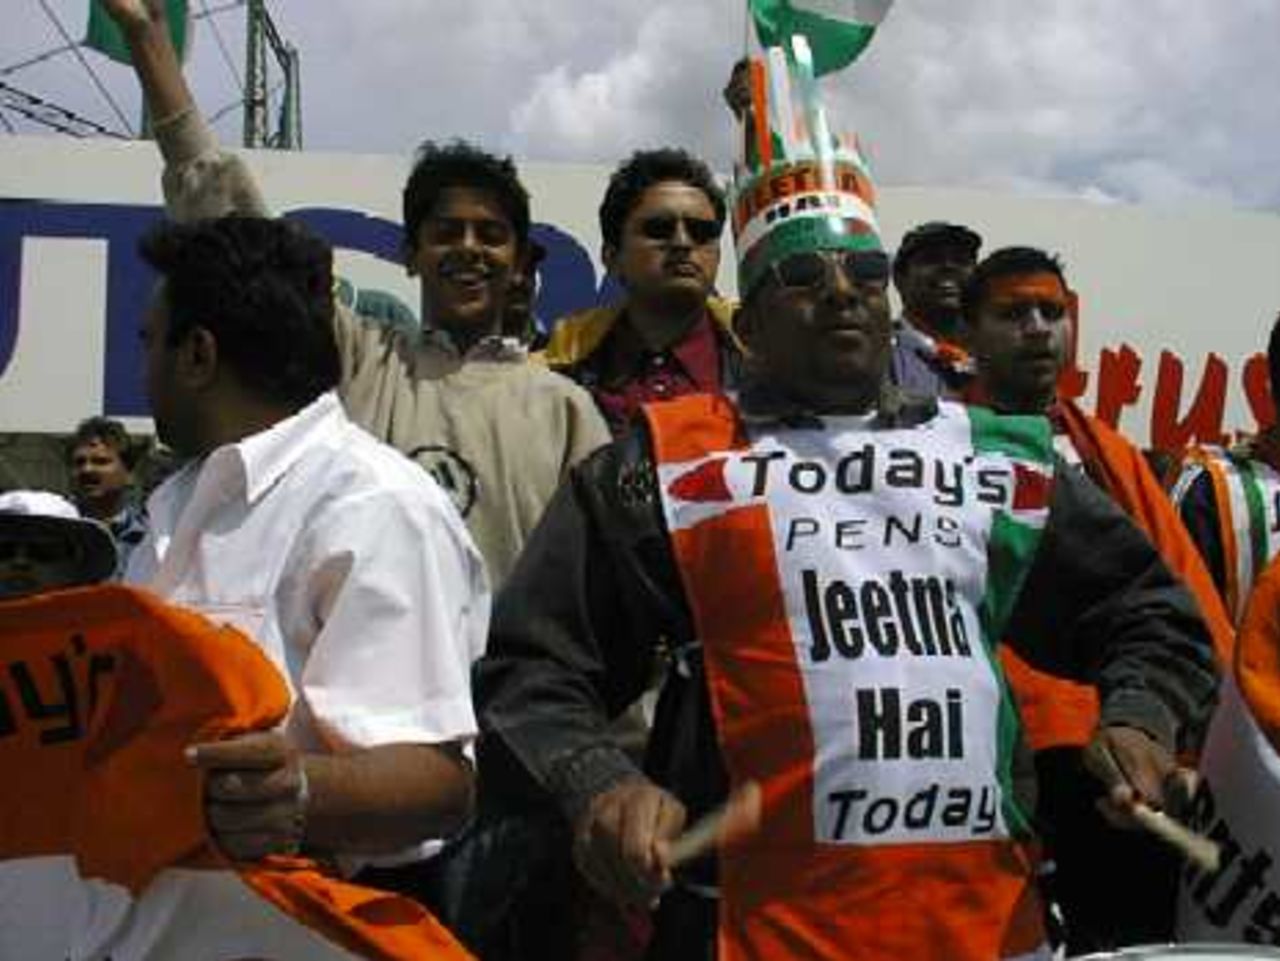 Indian fans at the Oval wearing a slogan "jeetna hai Today" (Must win today), another shot during the WC99 match against Australia on 4 June 1999